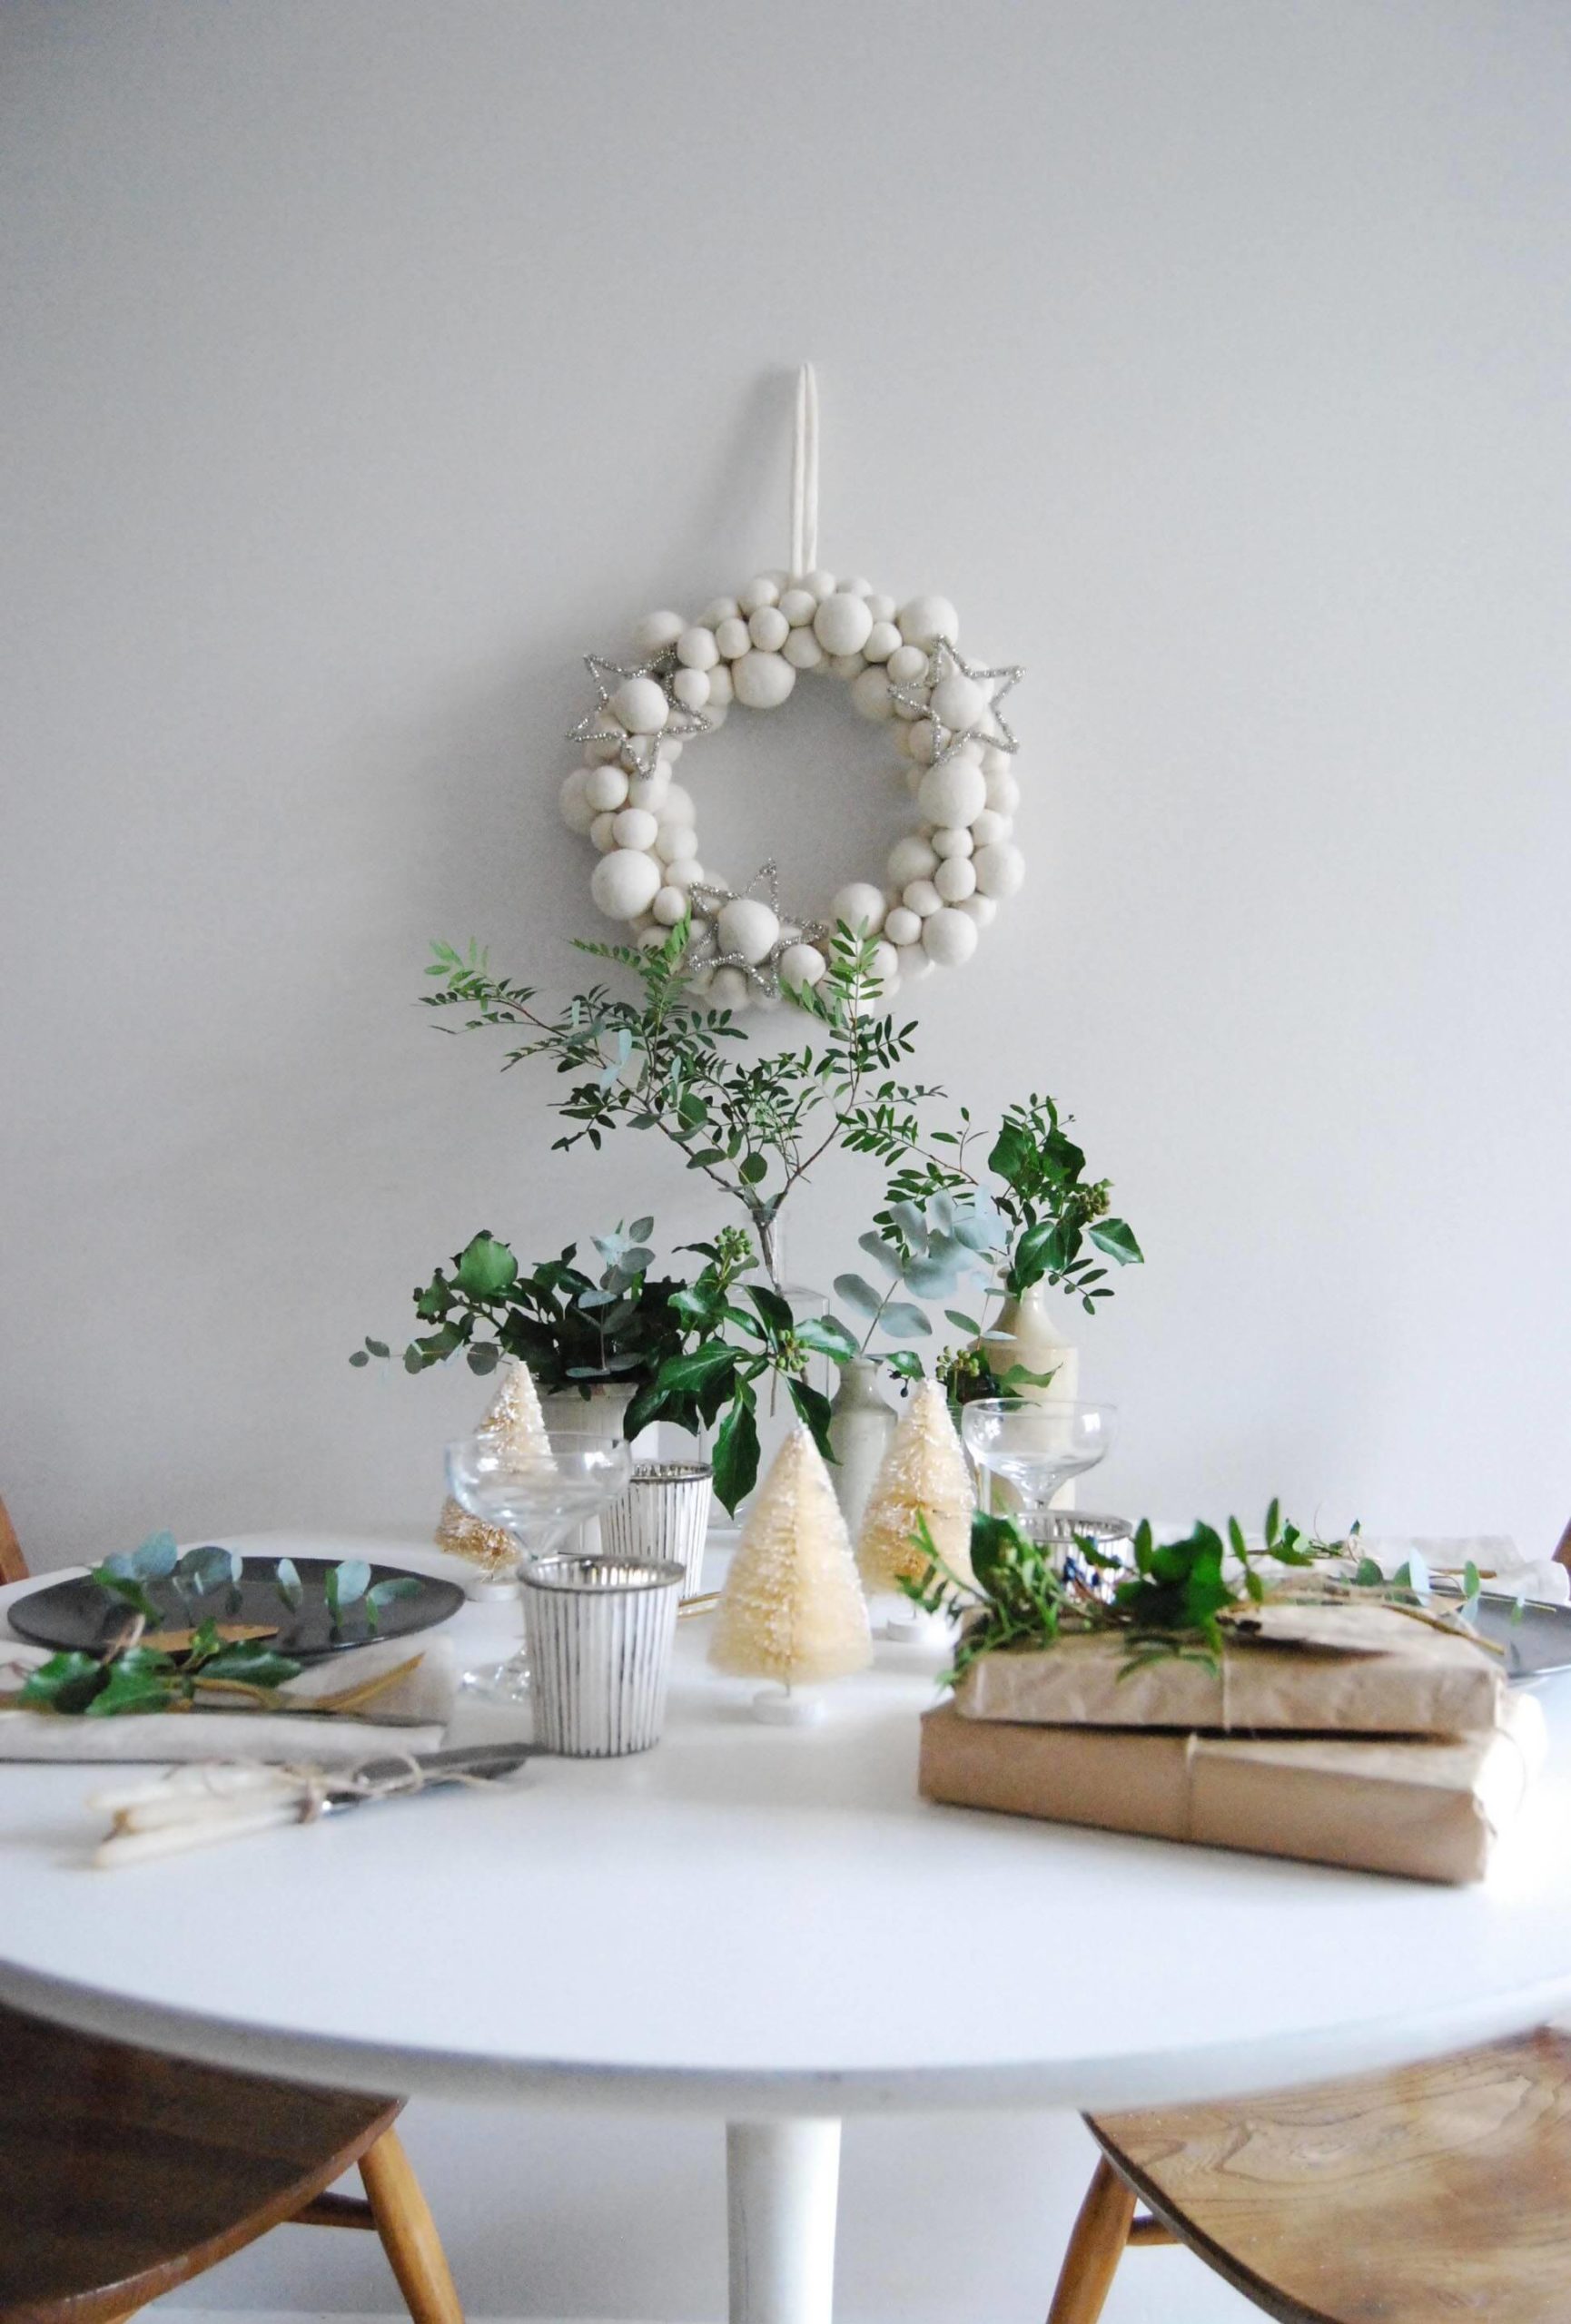 White Christmas wreath, decorative trees and greenery as an accent on the table (1)